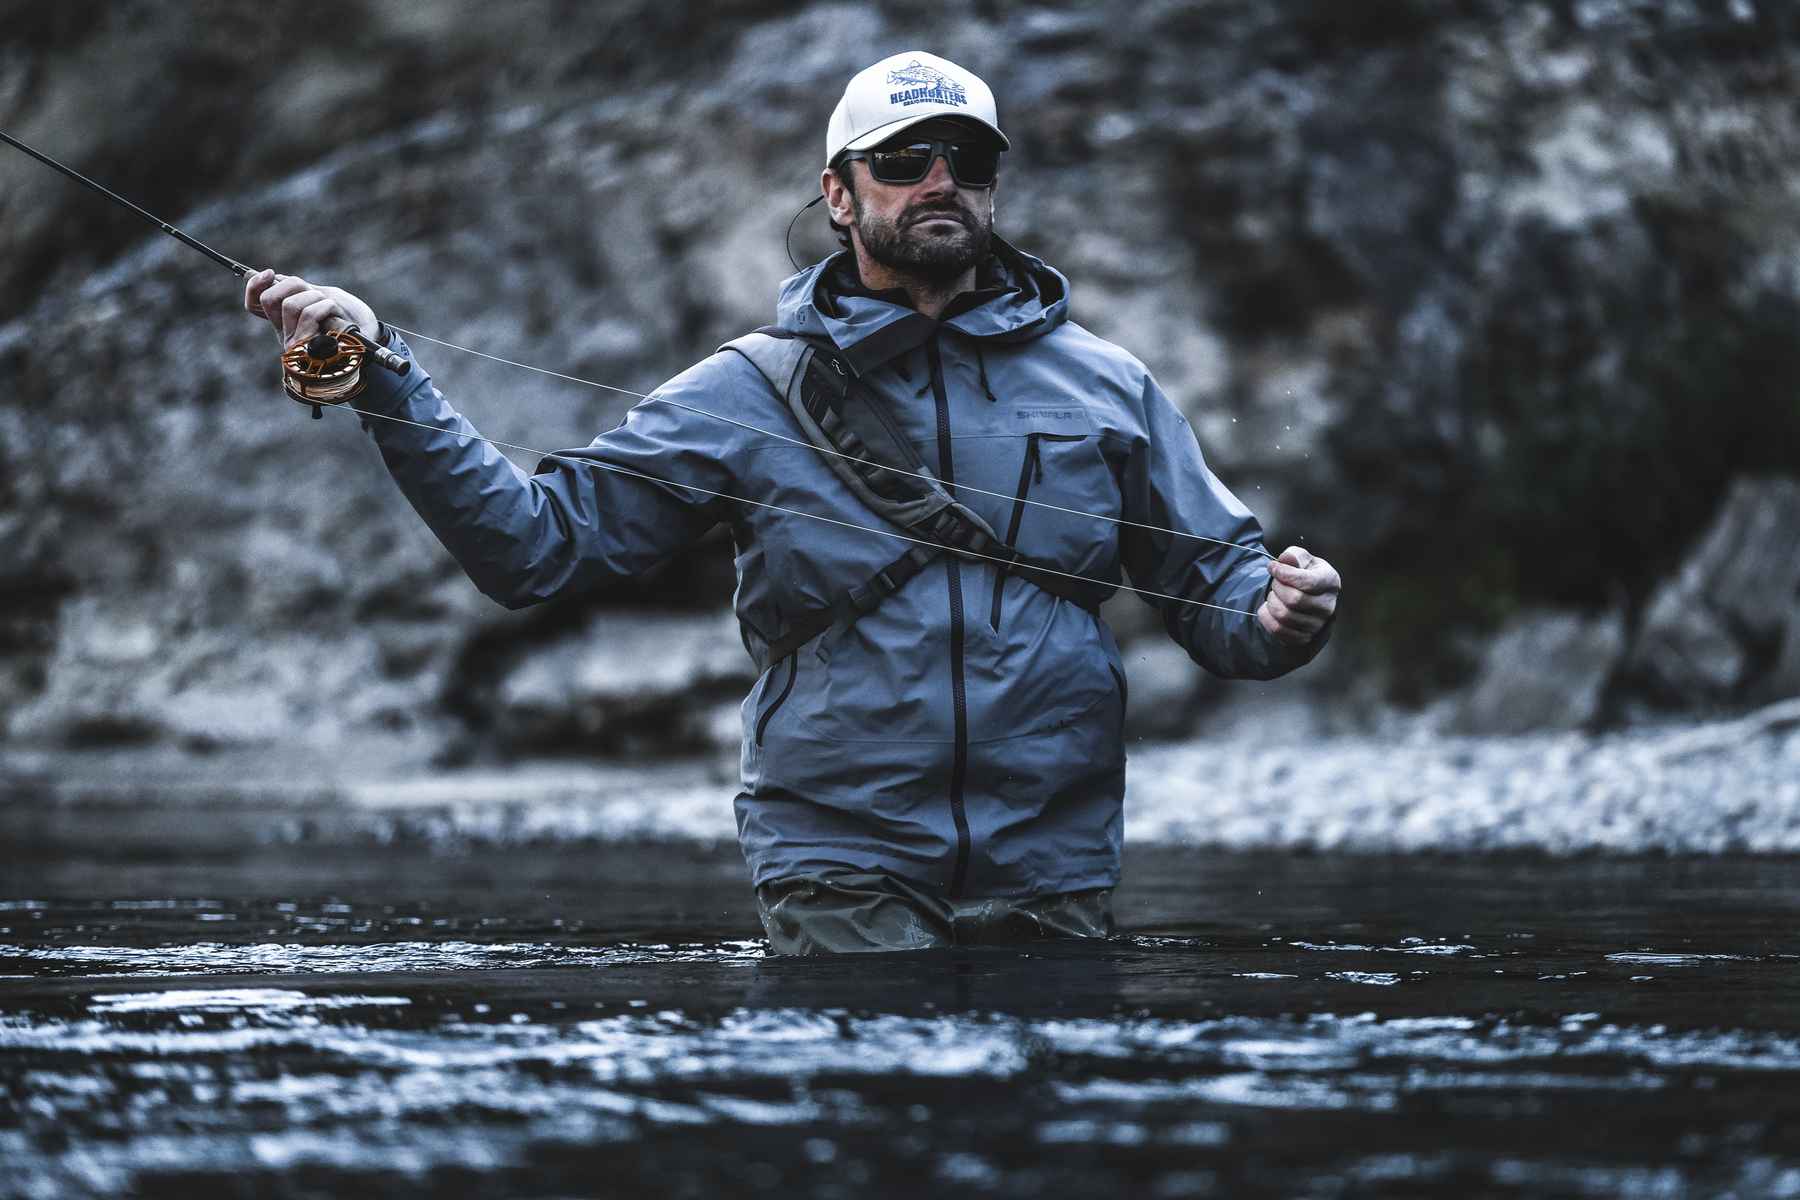 New Montana-based fly fishing apparel brand Skwala launches